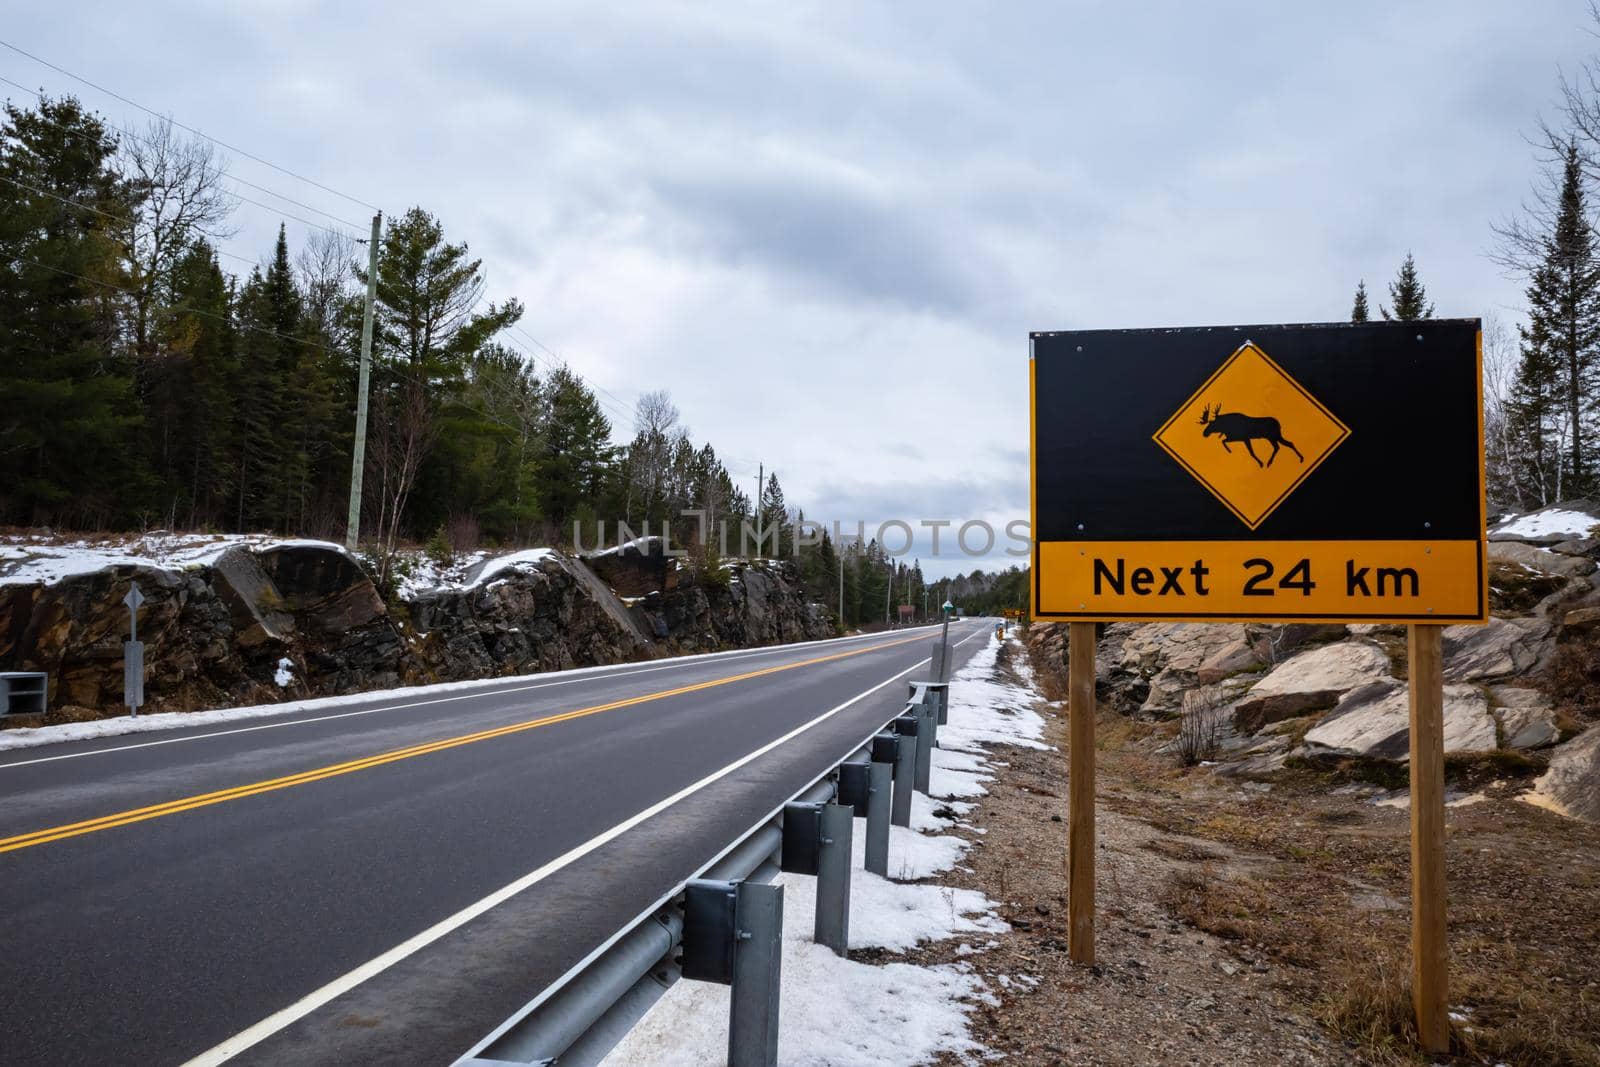 Moose crossing sign warns of hazard for next 24 km by colintemple